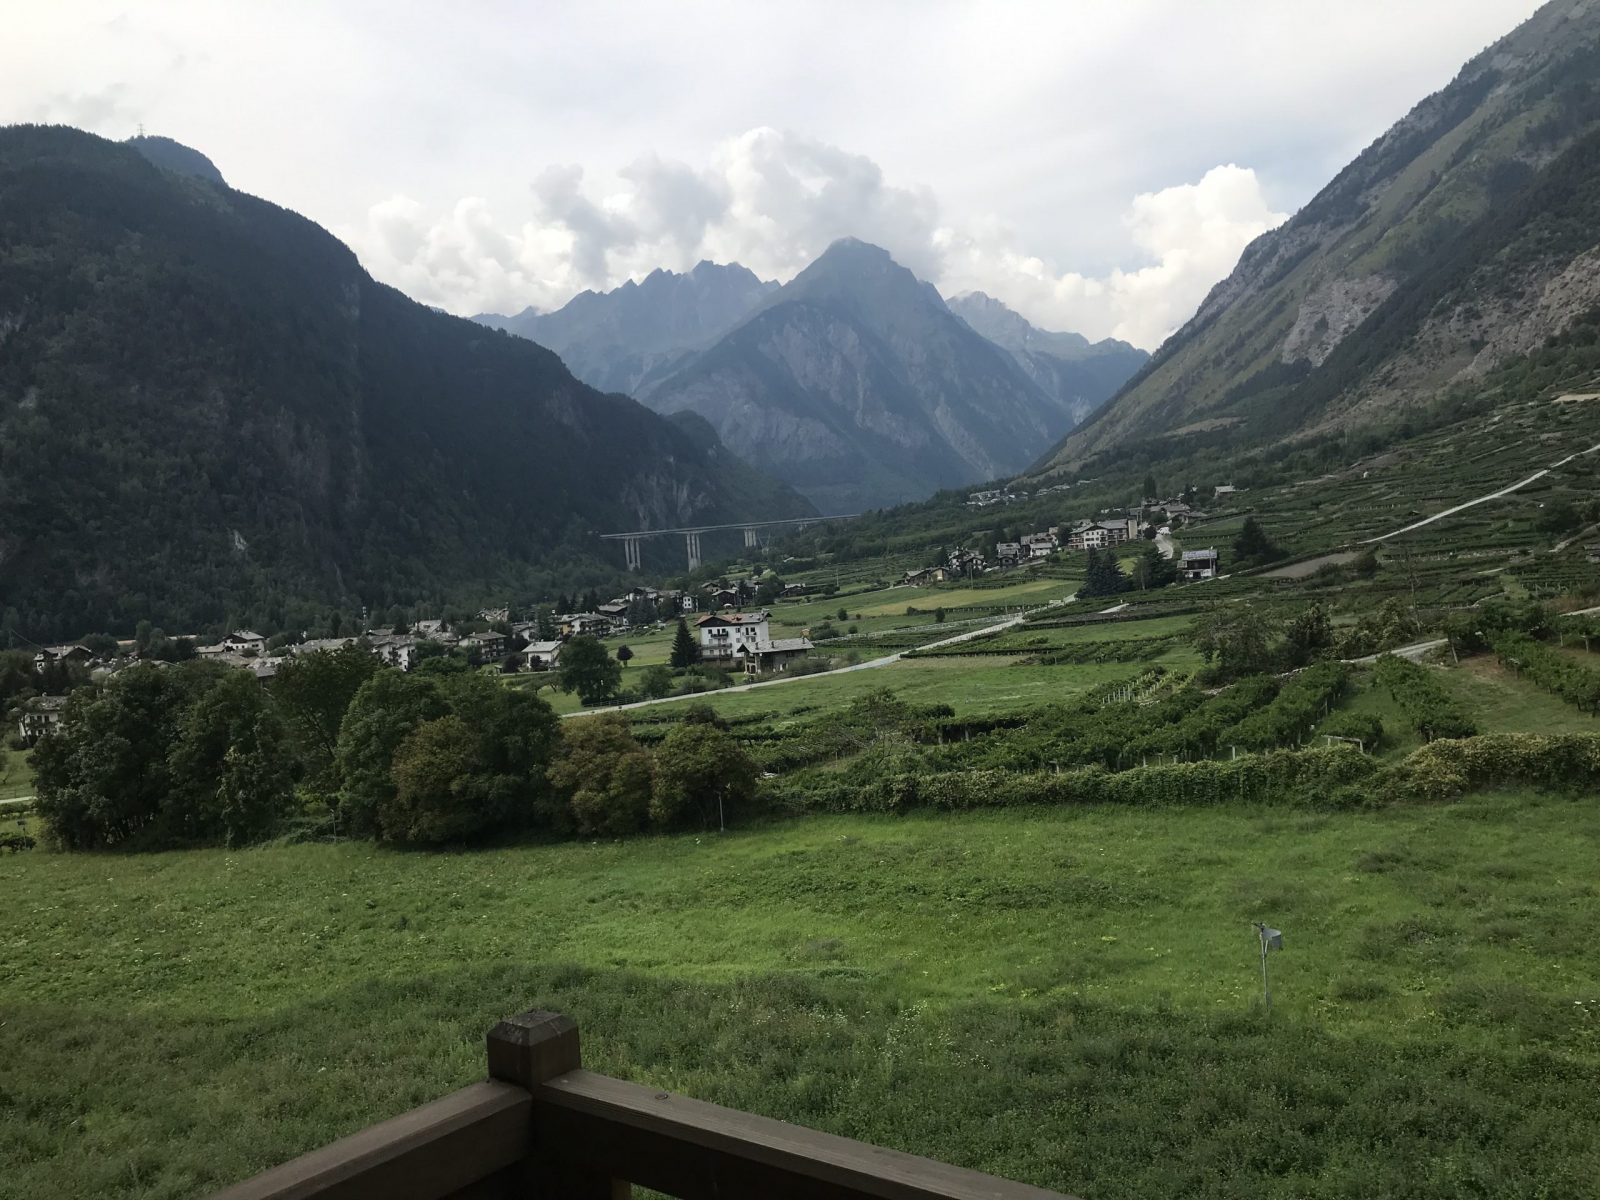 The views from the apartment of Villair de Morgex, with the Motorway Bridge on the background, which we called now Ozzy's bridge as we always walk under it in our daily walks while in the Valdigne. My experience of buying a home in the Italian Alps.